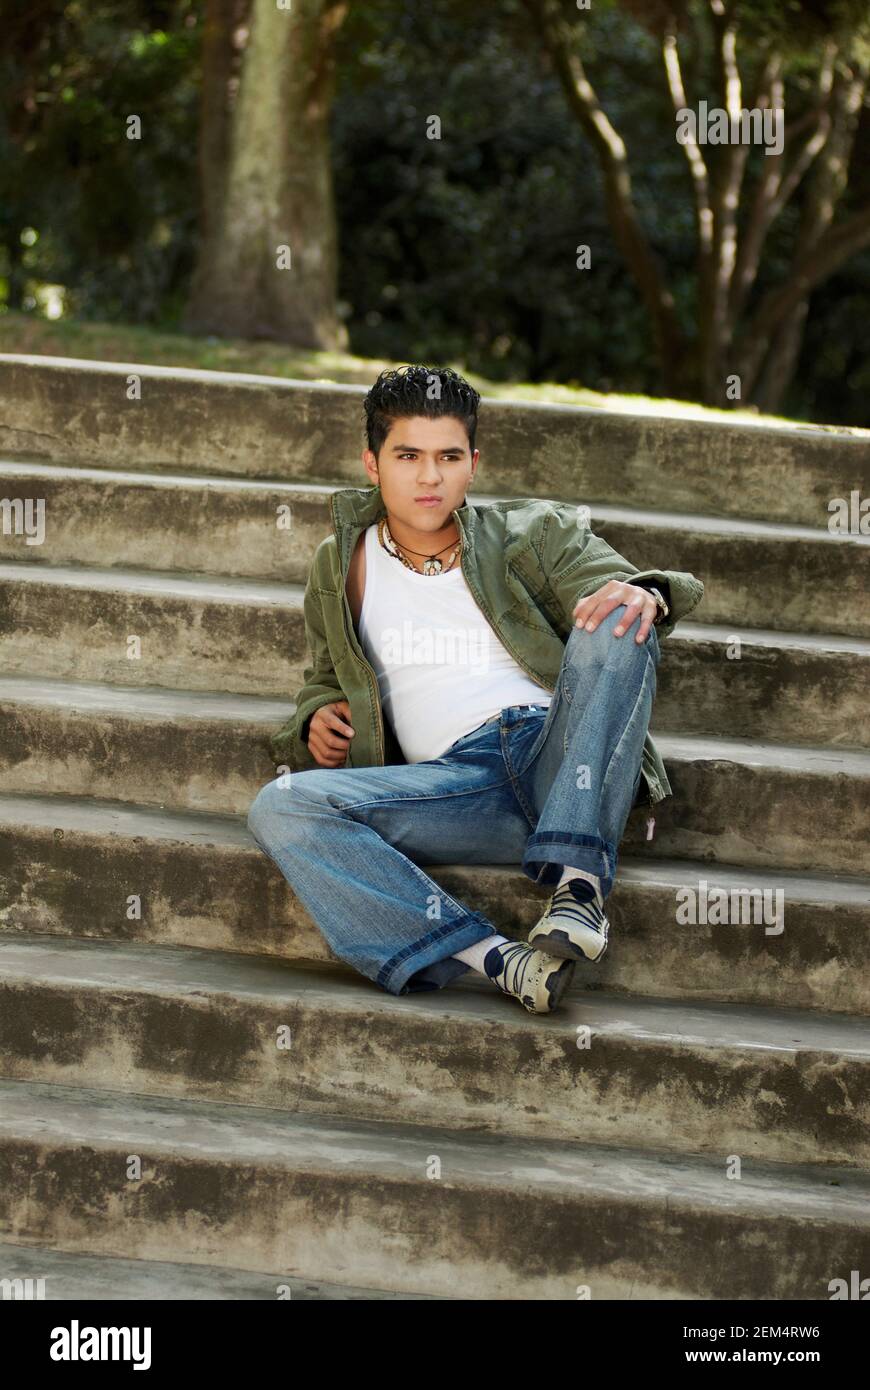 Mid adult man sitting on steps and looking away Stock Photo